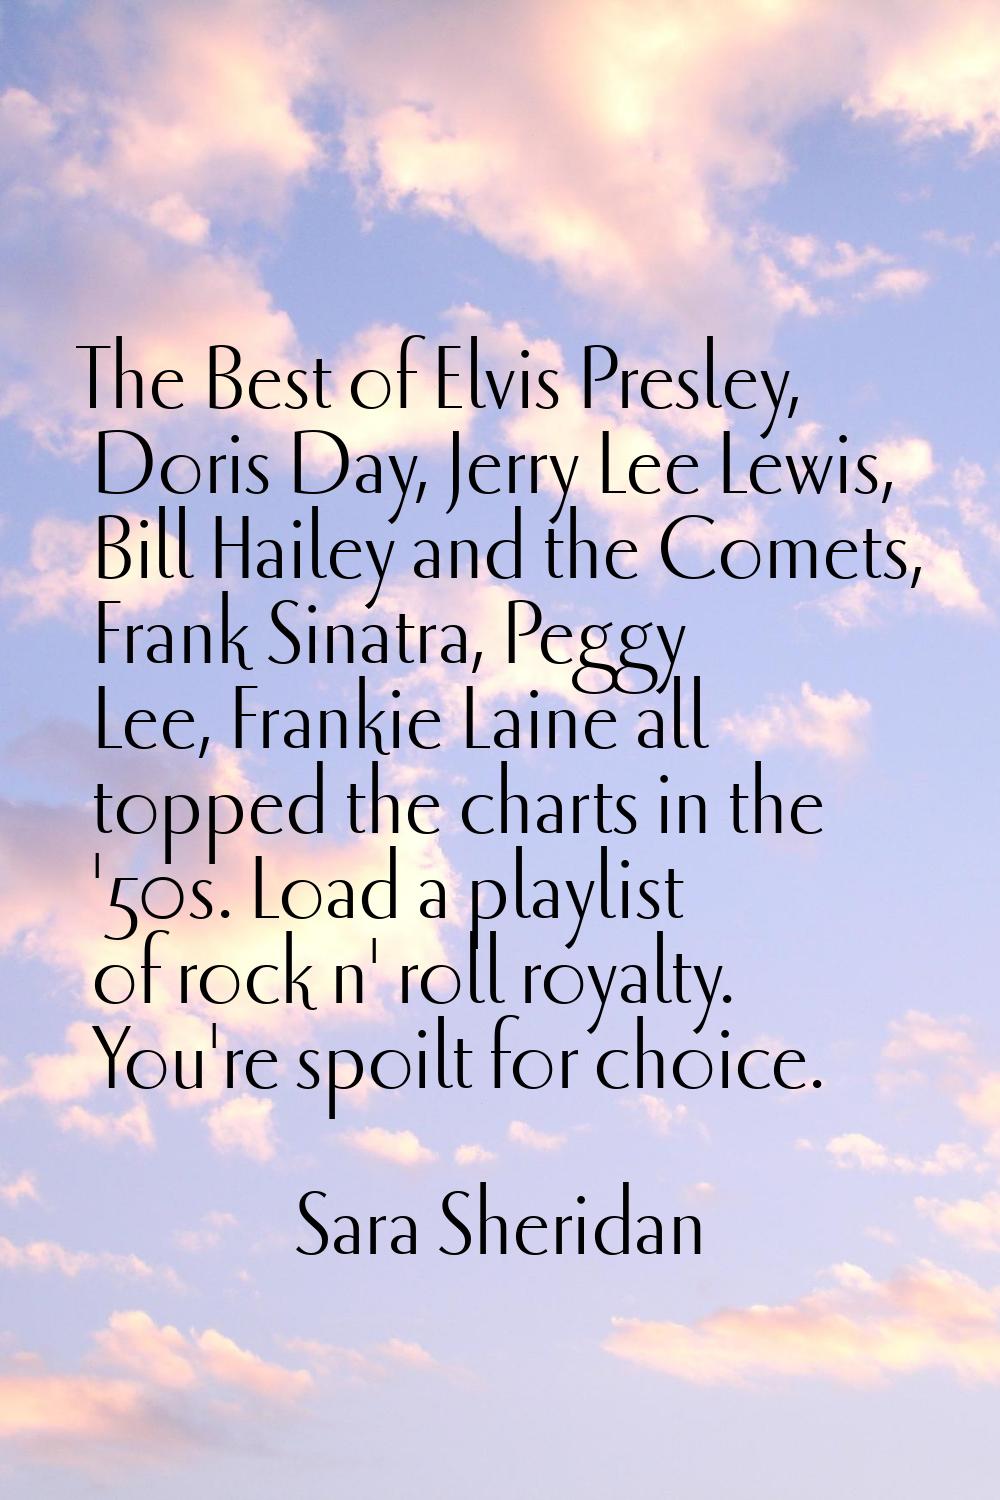 The Best of Elvis Presley, Doris Day, Jerry Lee Lewis, Bill Hailey and the Comets, Frank Sinatra, P